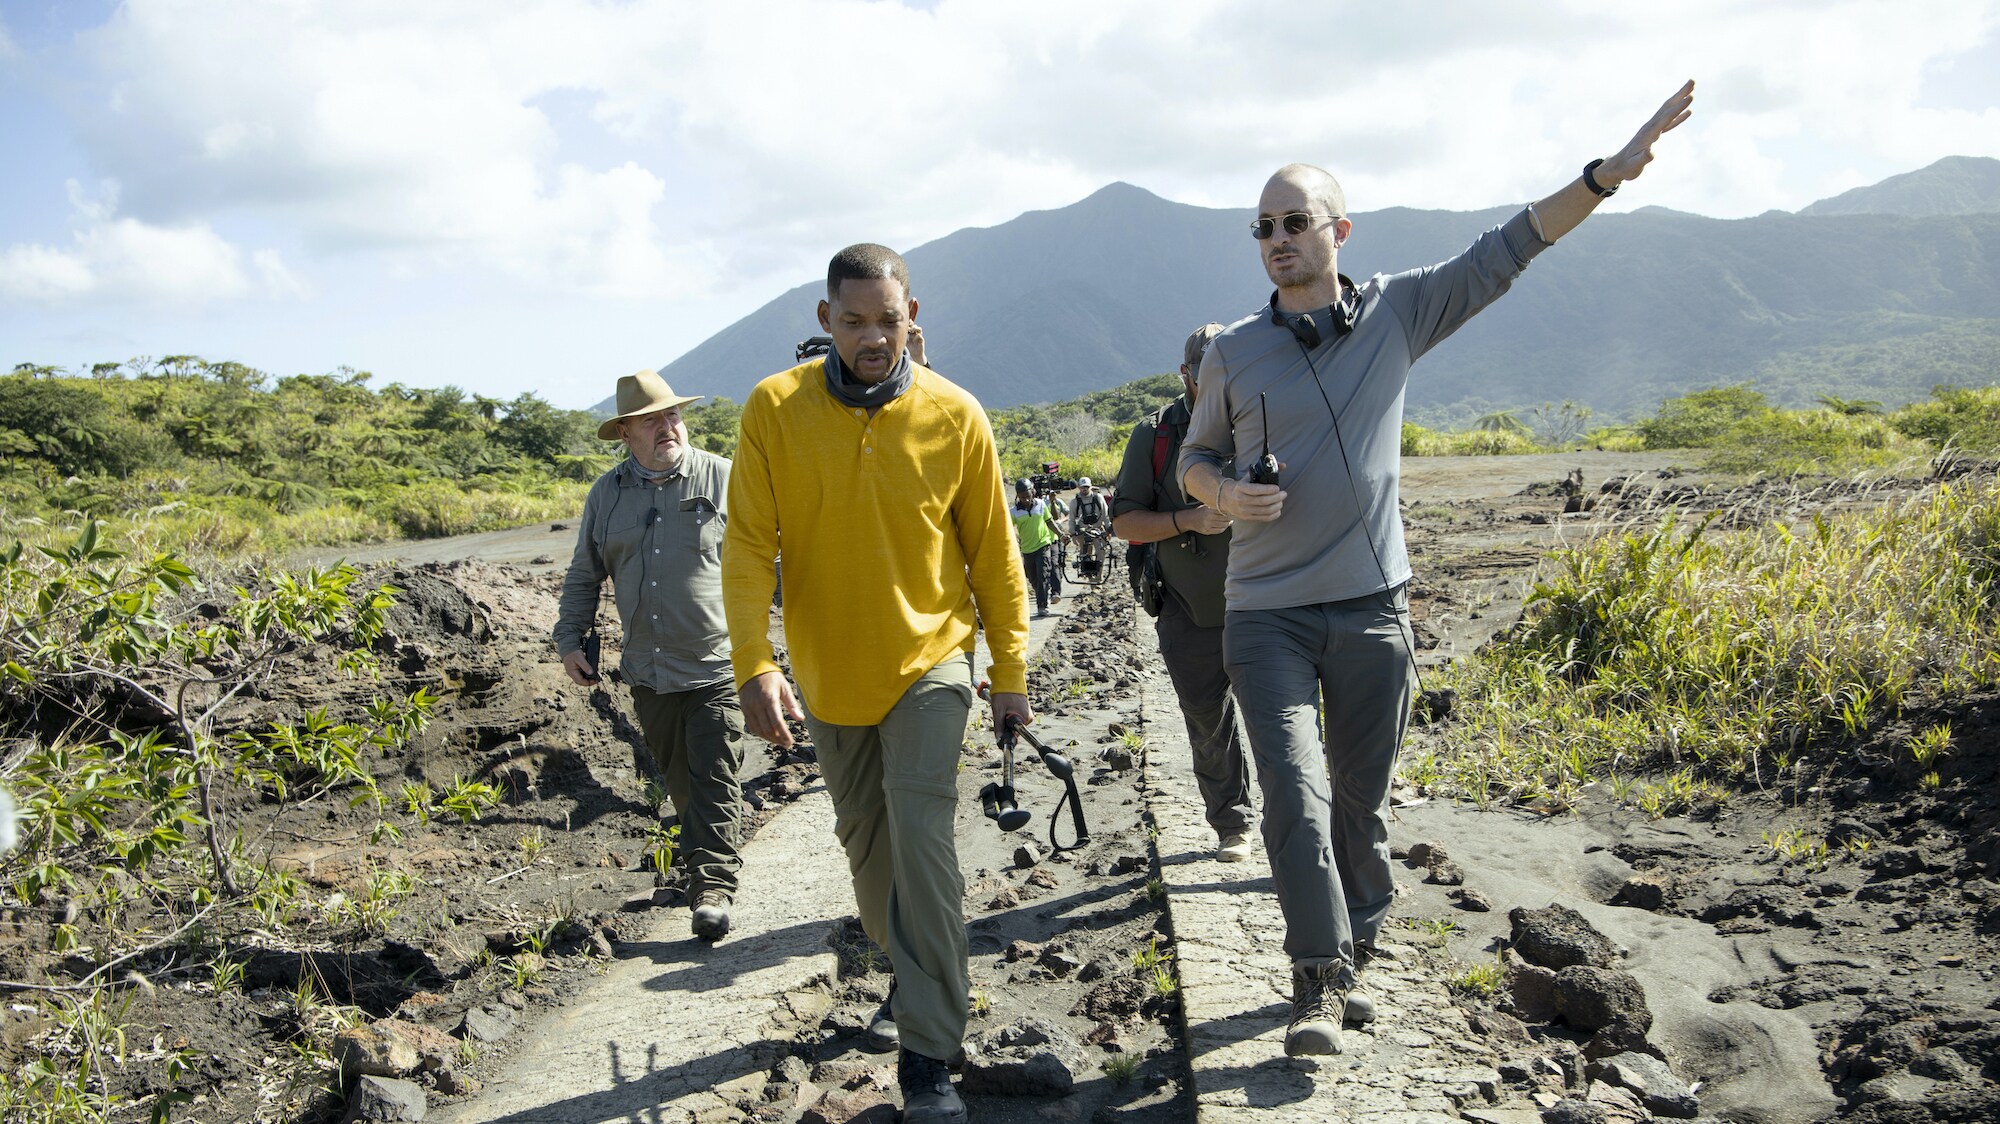 Will Smith, left, and Darren Aronofsky during production of Welcome to Earth where Will descends into a volcano to install sensors. (National Geographic for Disney+/Kyle Christy)